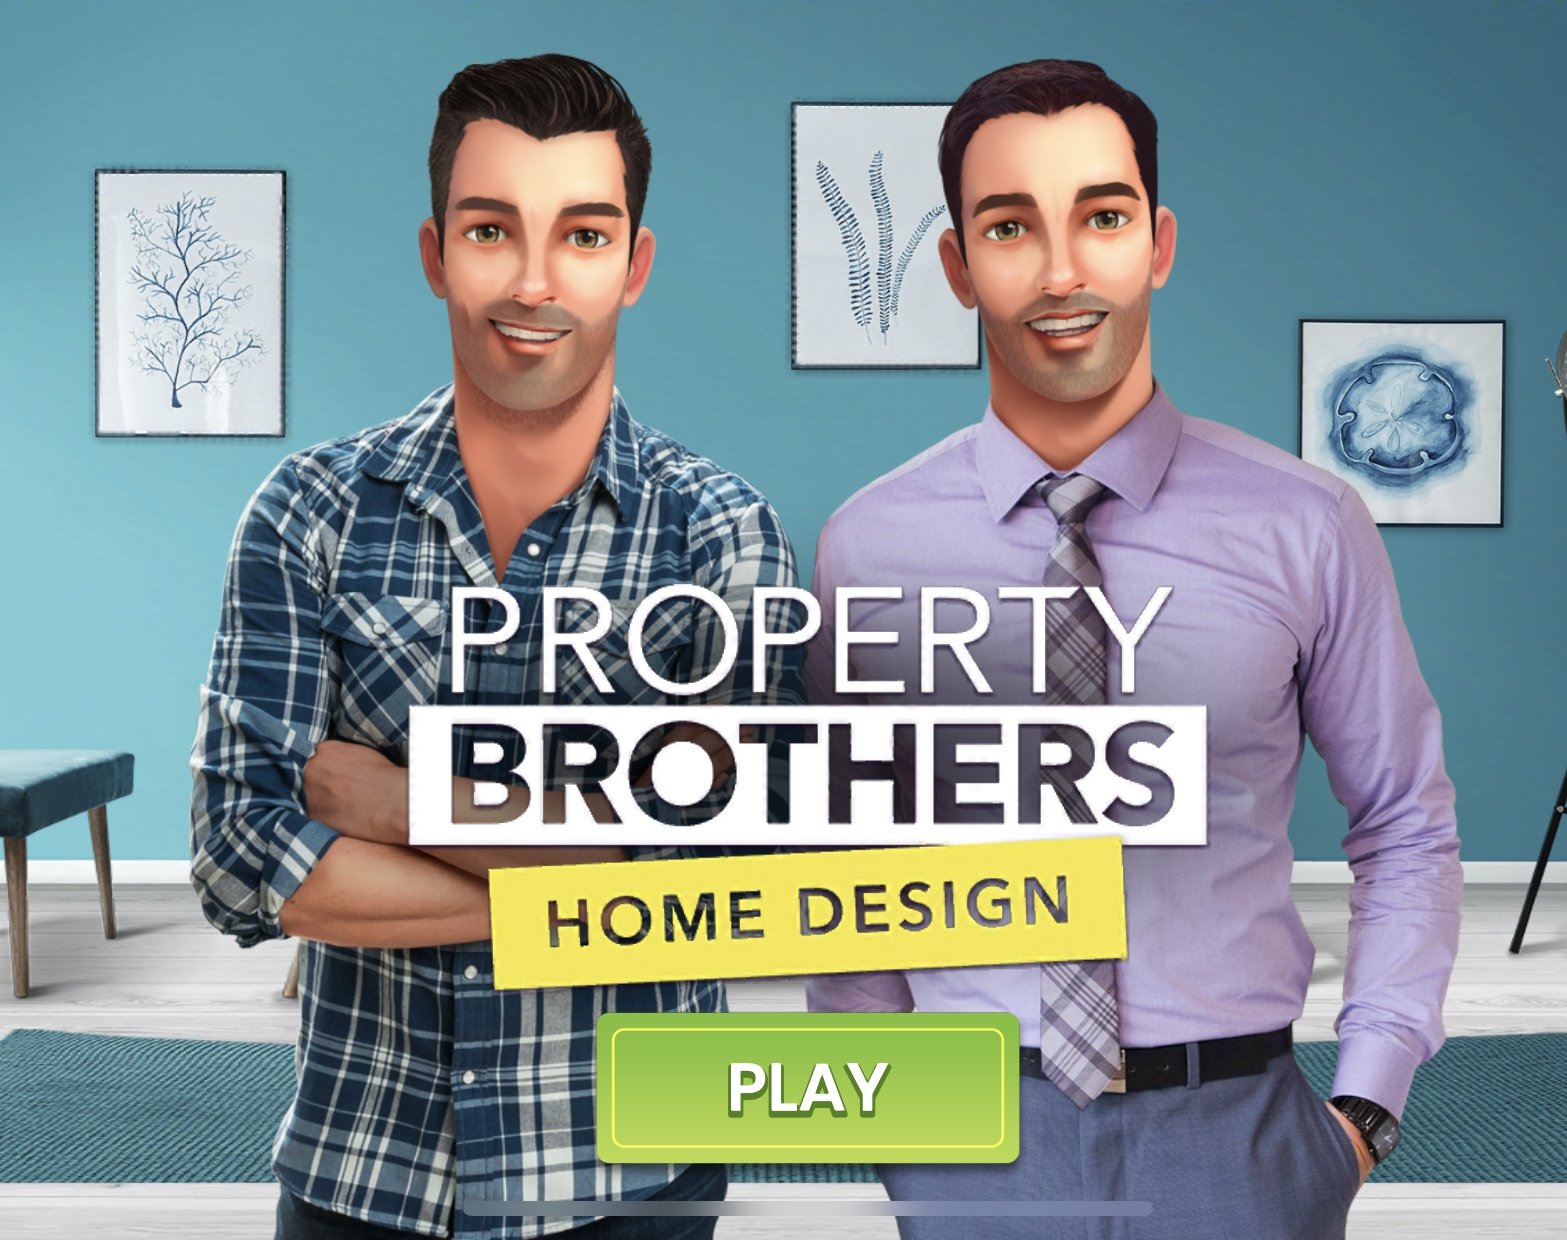 What design app do Property Brothers use?